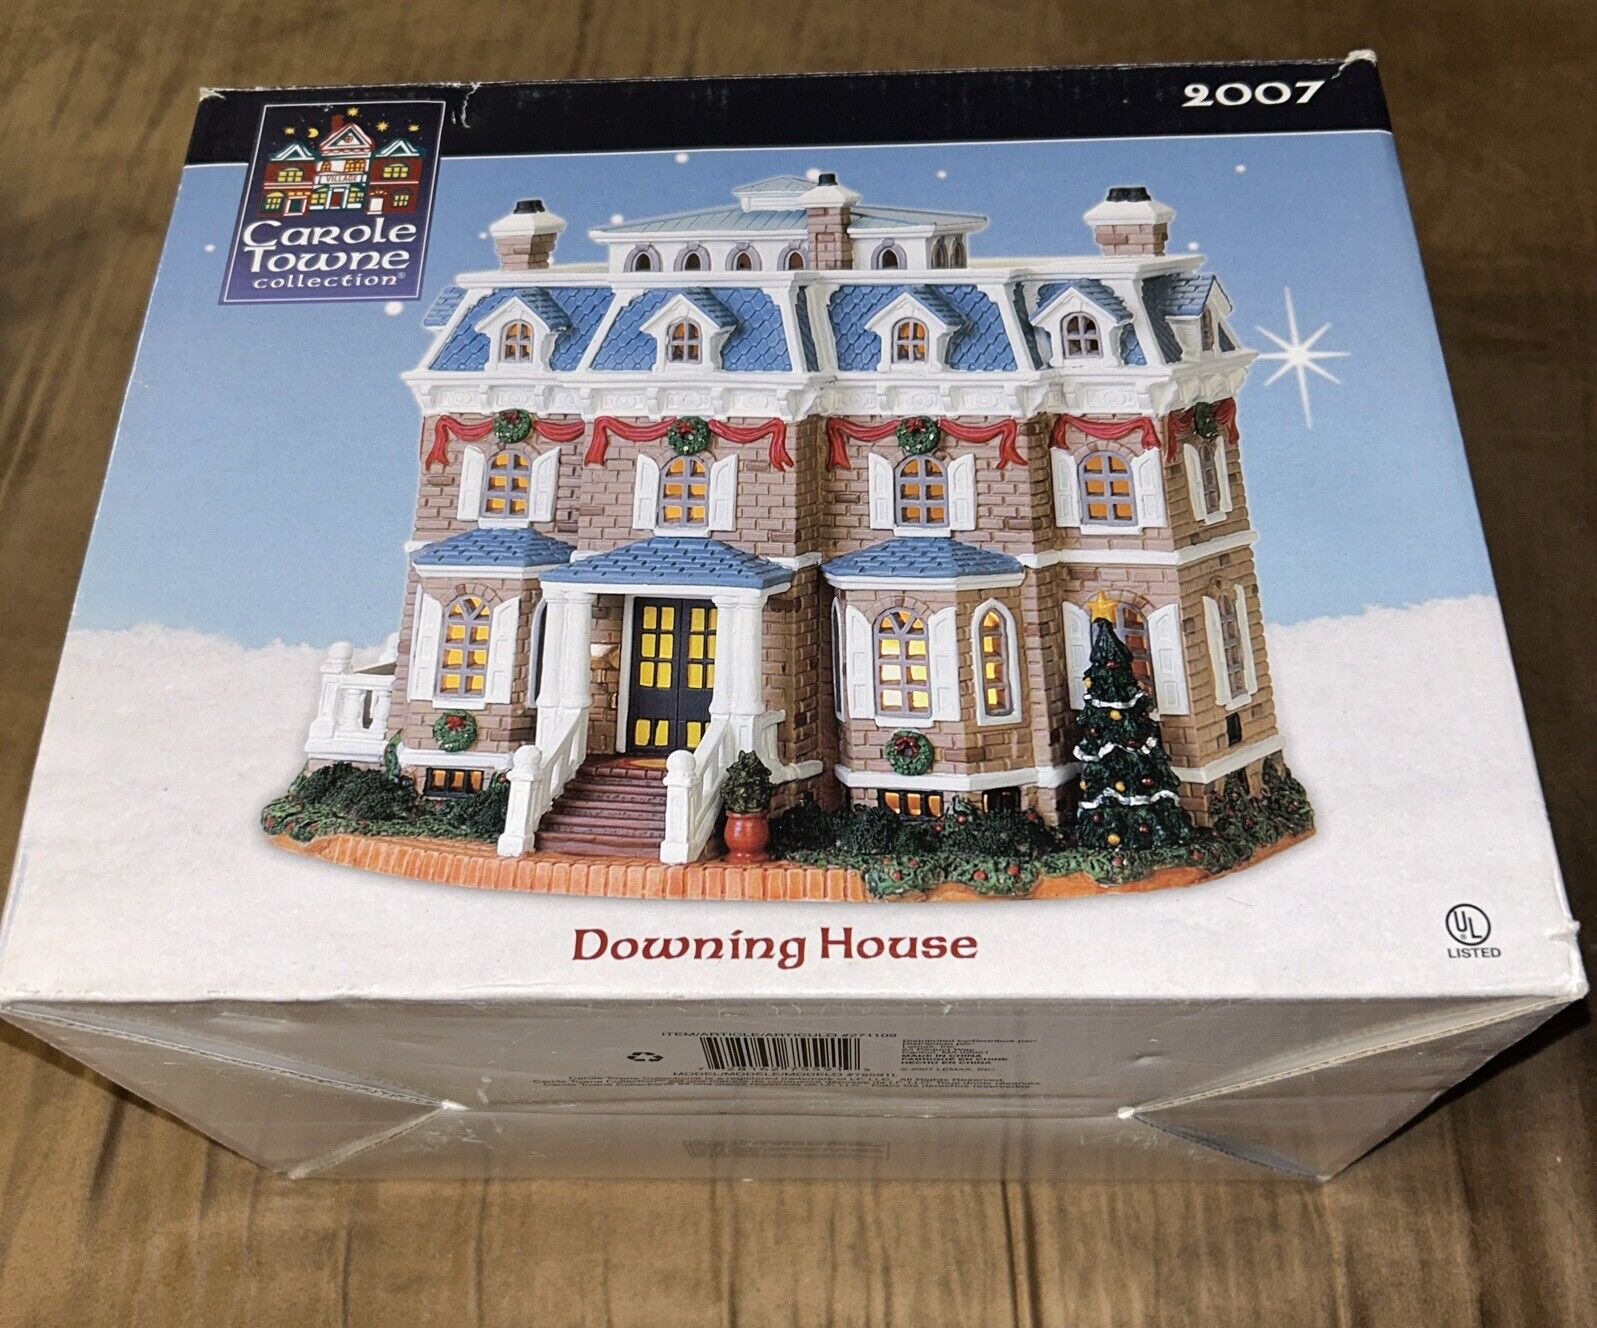 Lemax Carole Towne Collection Downing House 2007 Lighted Christmas Village